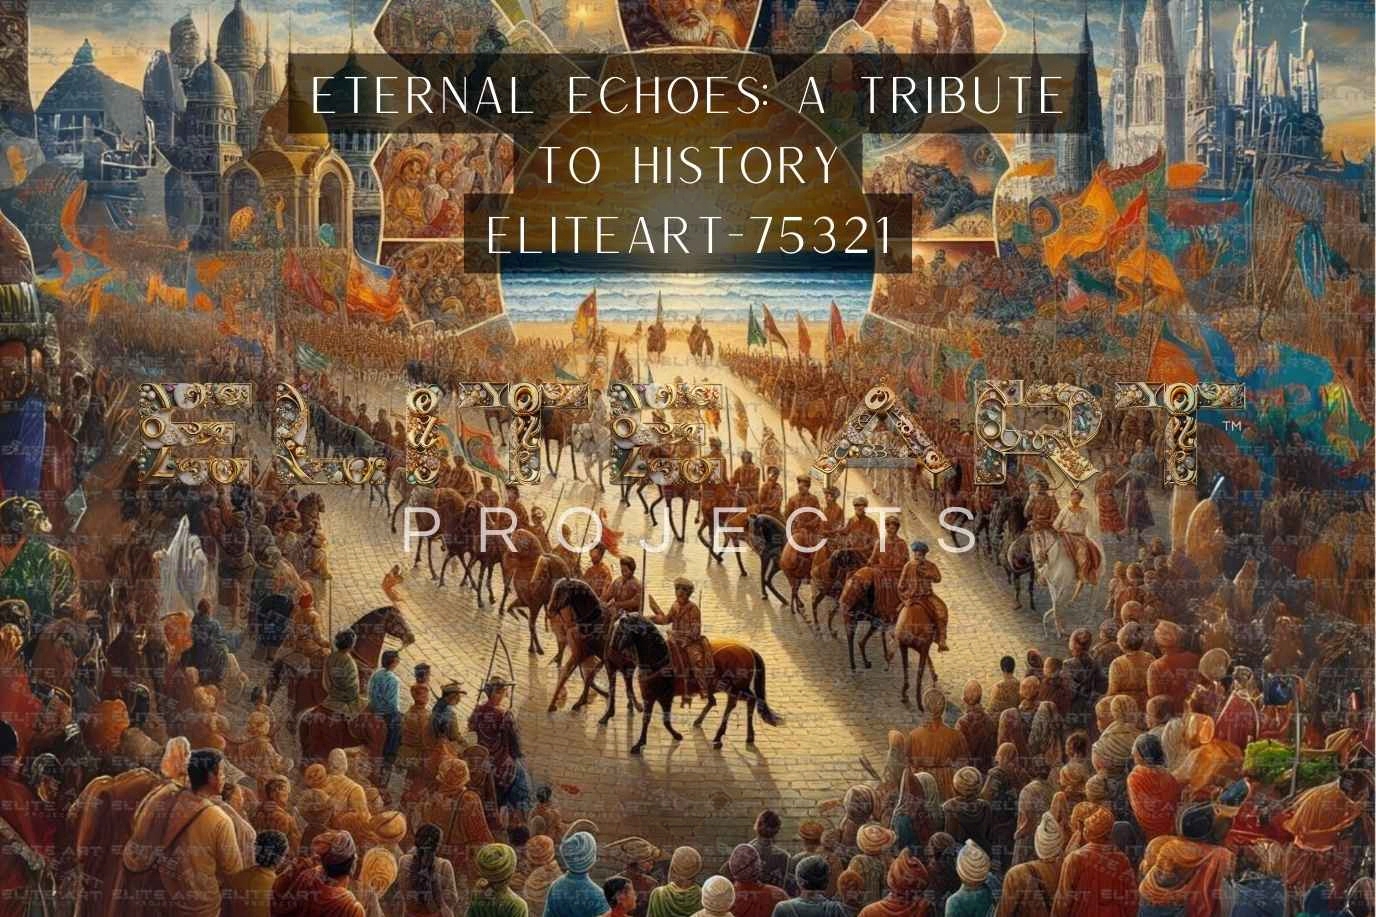 Eternal Echoes: A Tribute to History historical